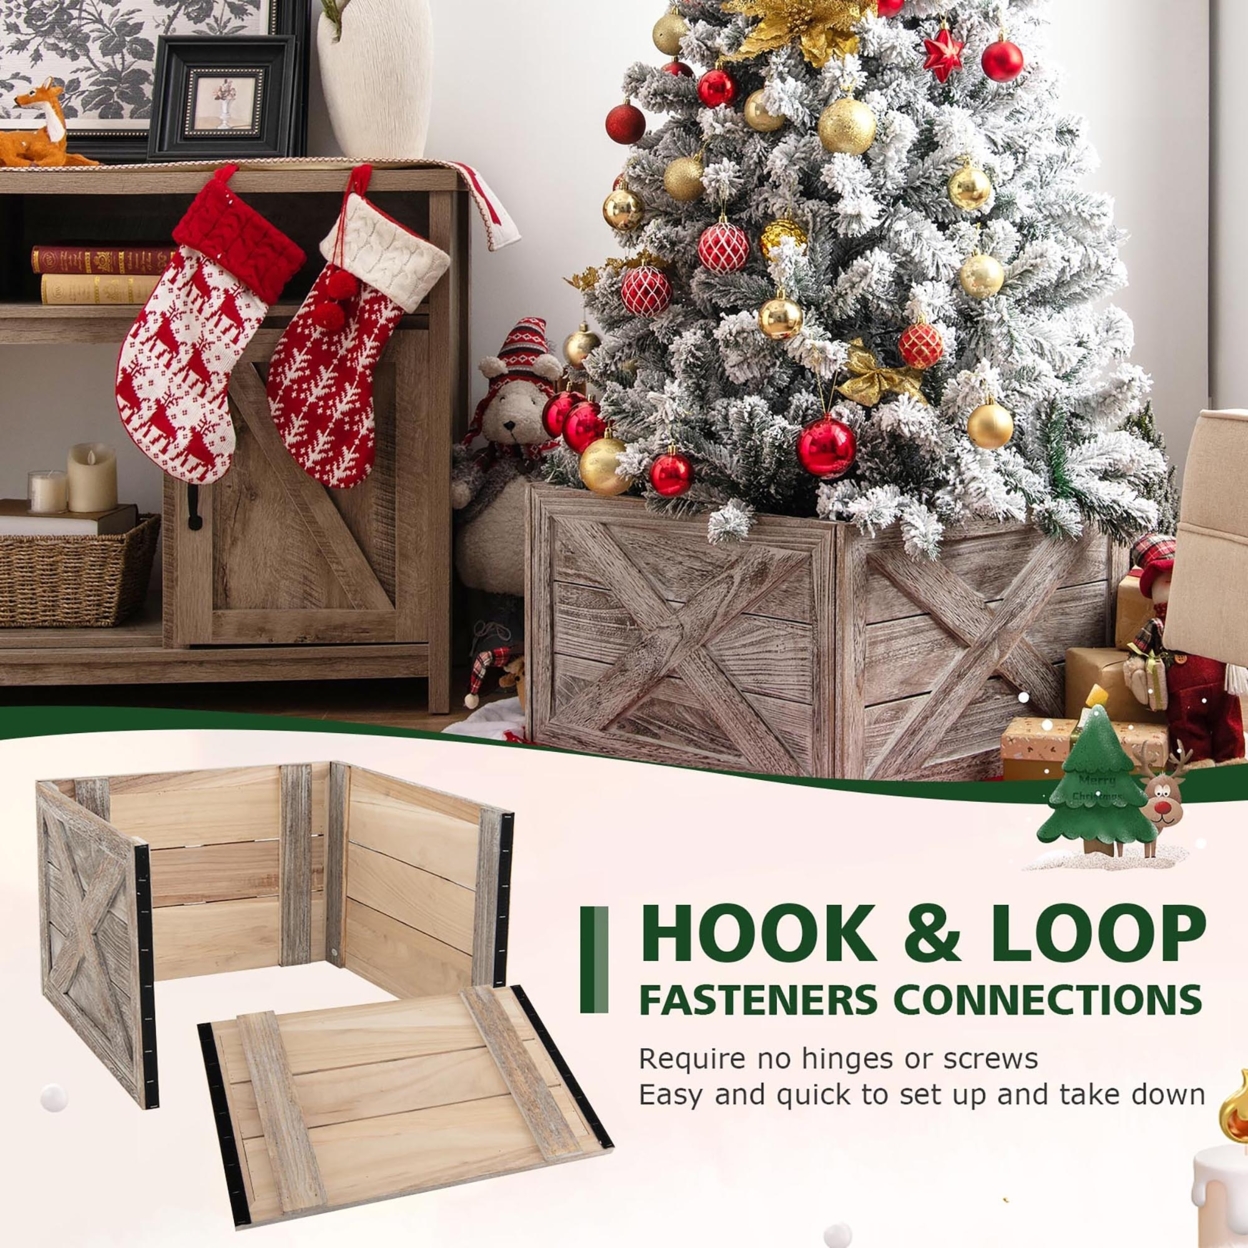 30.5 X 22.5 Inches Solid Wooden Christmas Tree Box W/ Hook & Loop Fasteners - Grey